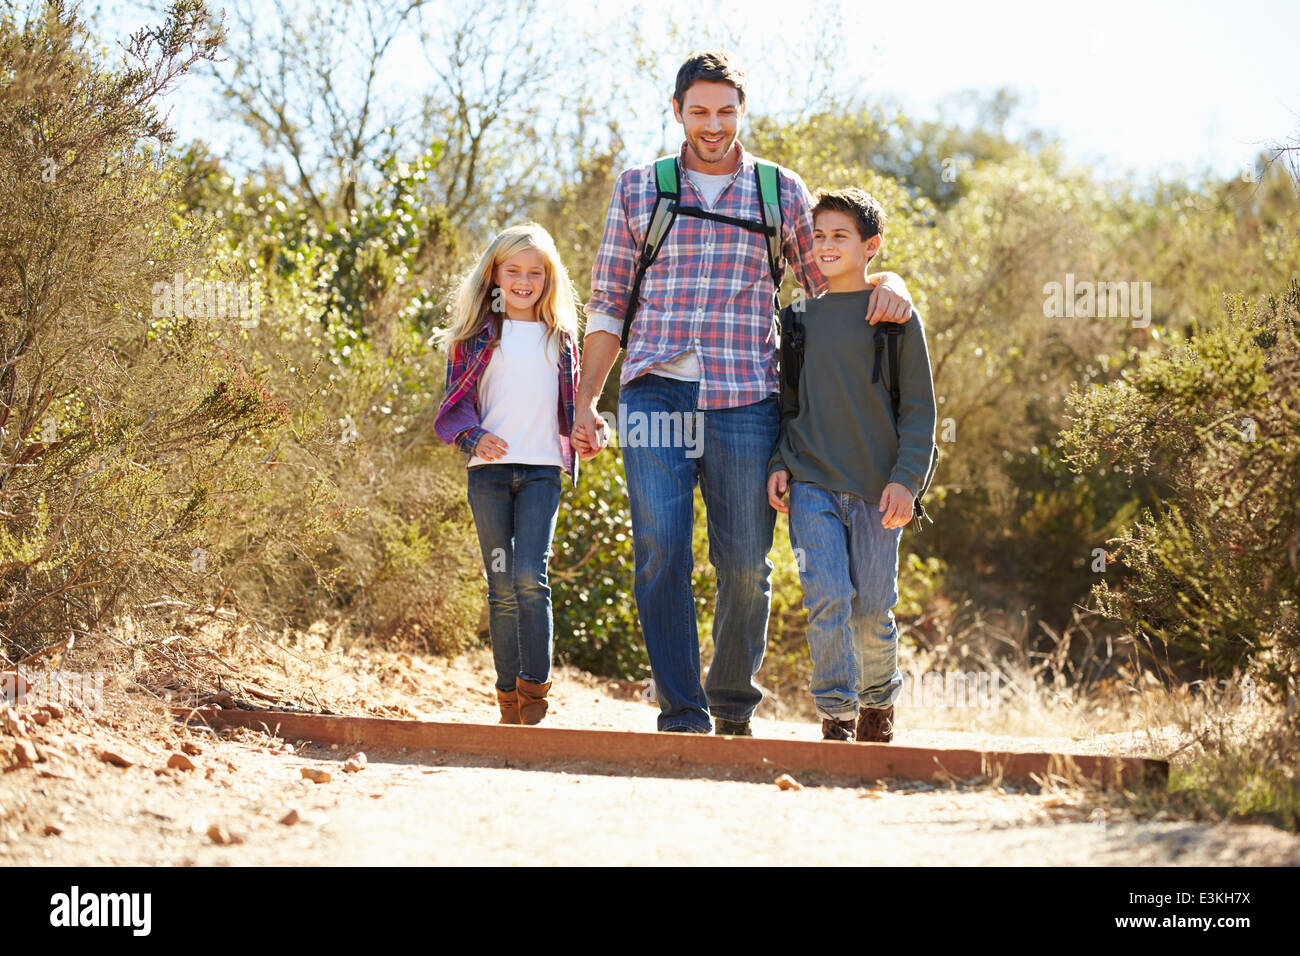 Father And Children Hiking In Countryside Wearing Backpacks Stock Photo